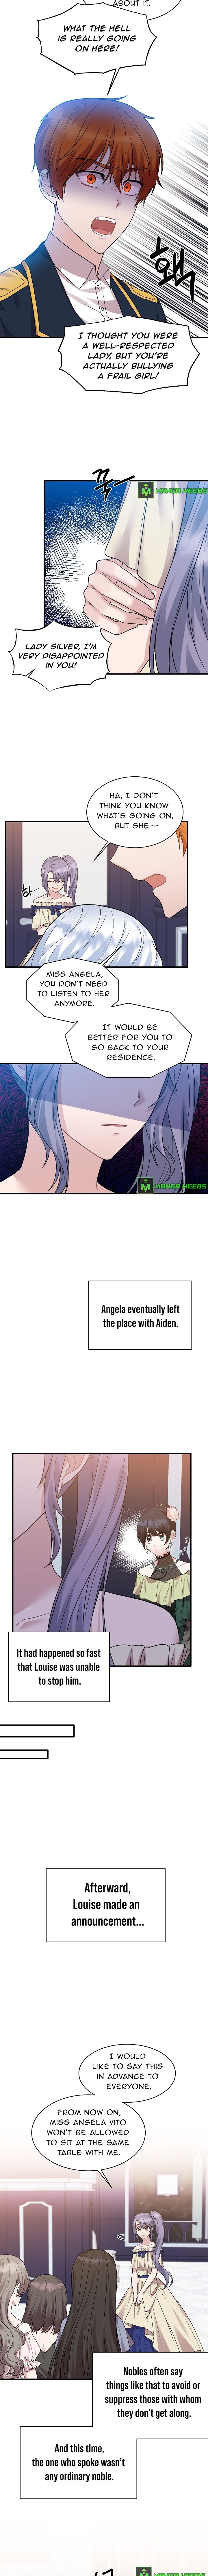 Angelic Lady Chapter 38 page 3